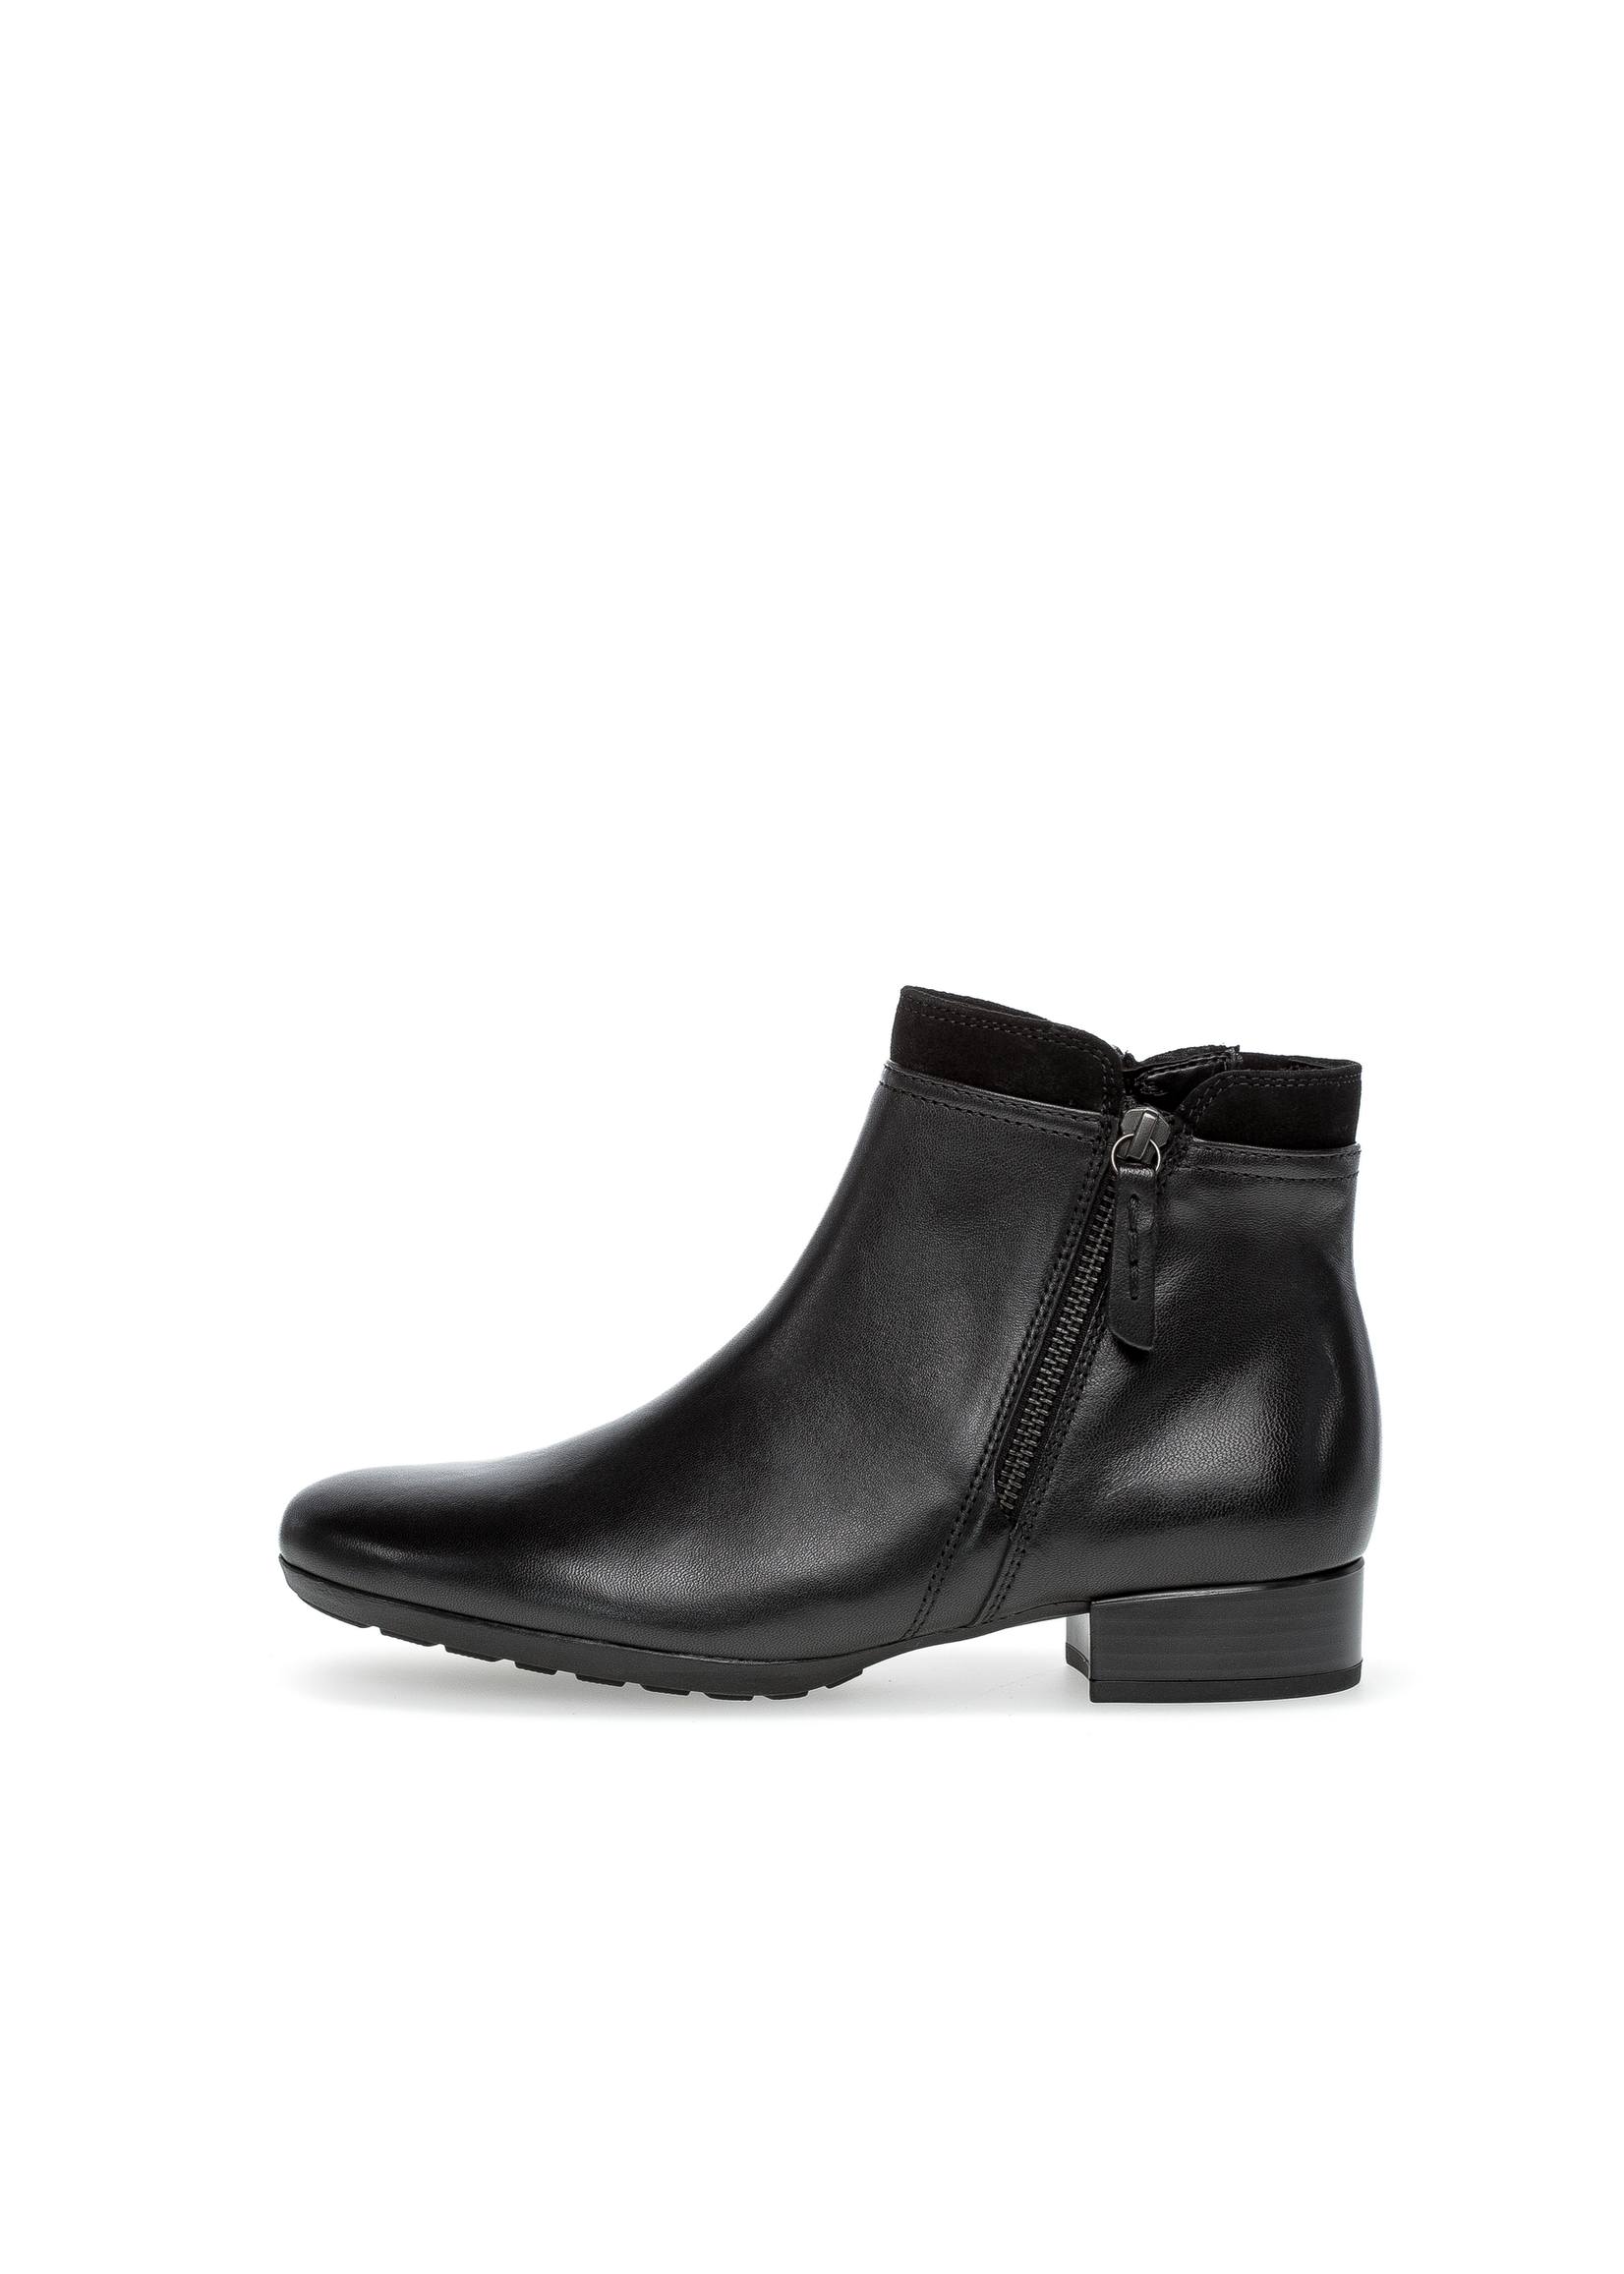 Gabor Black Leather Double Zip Ankle Comfort Boot by Gabor 32.718.57